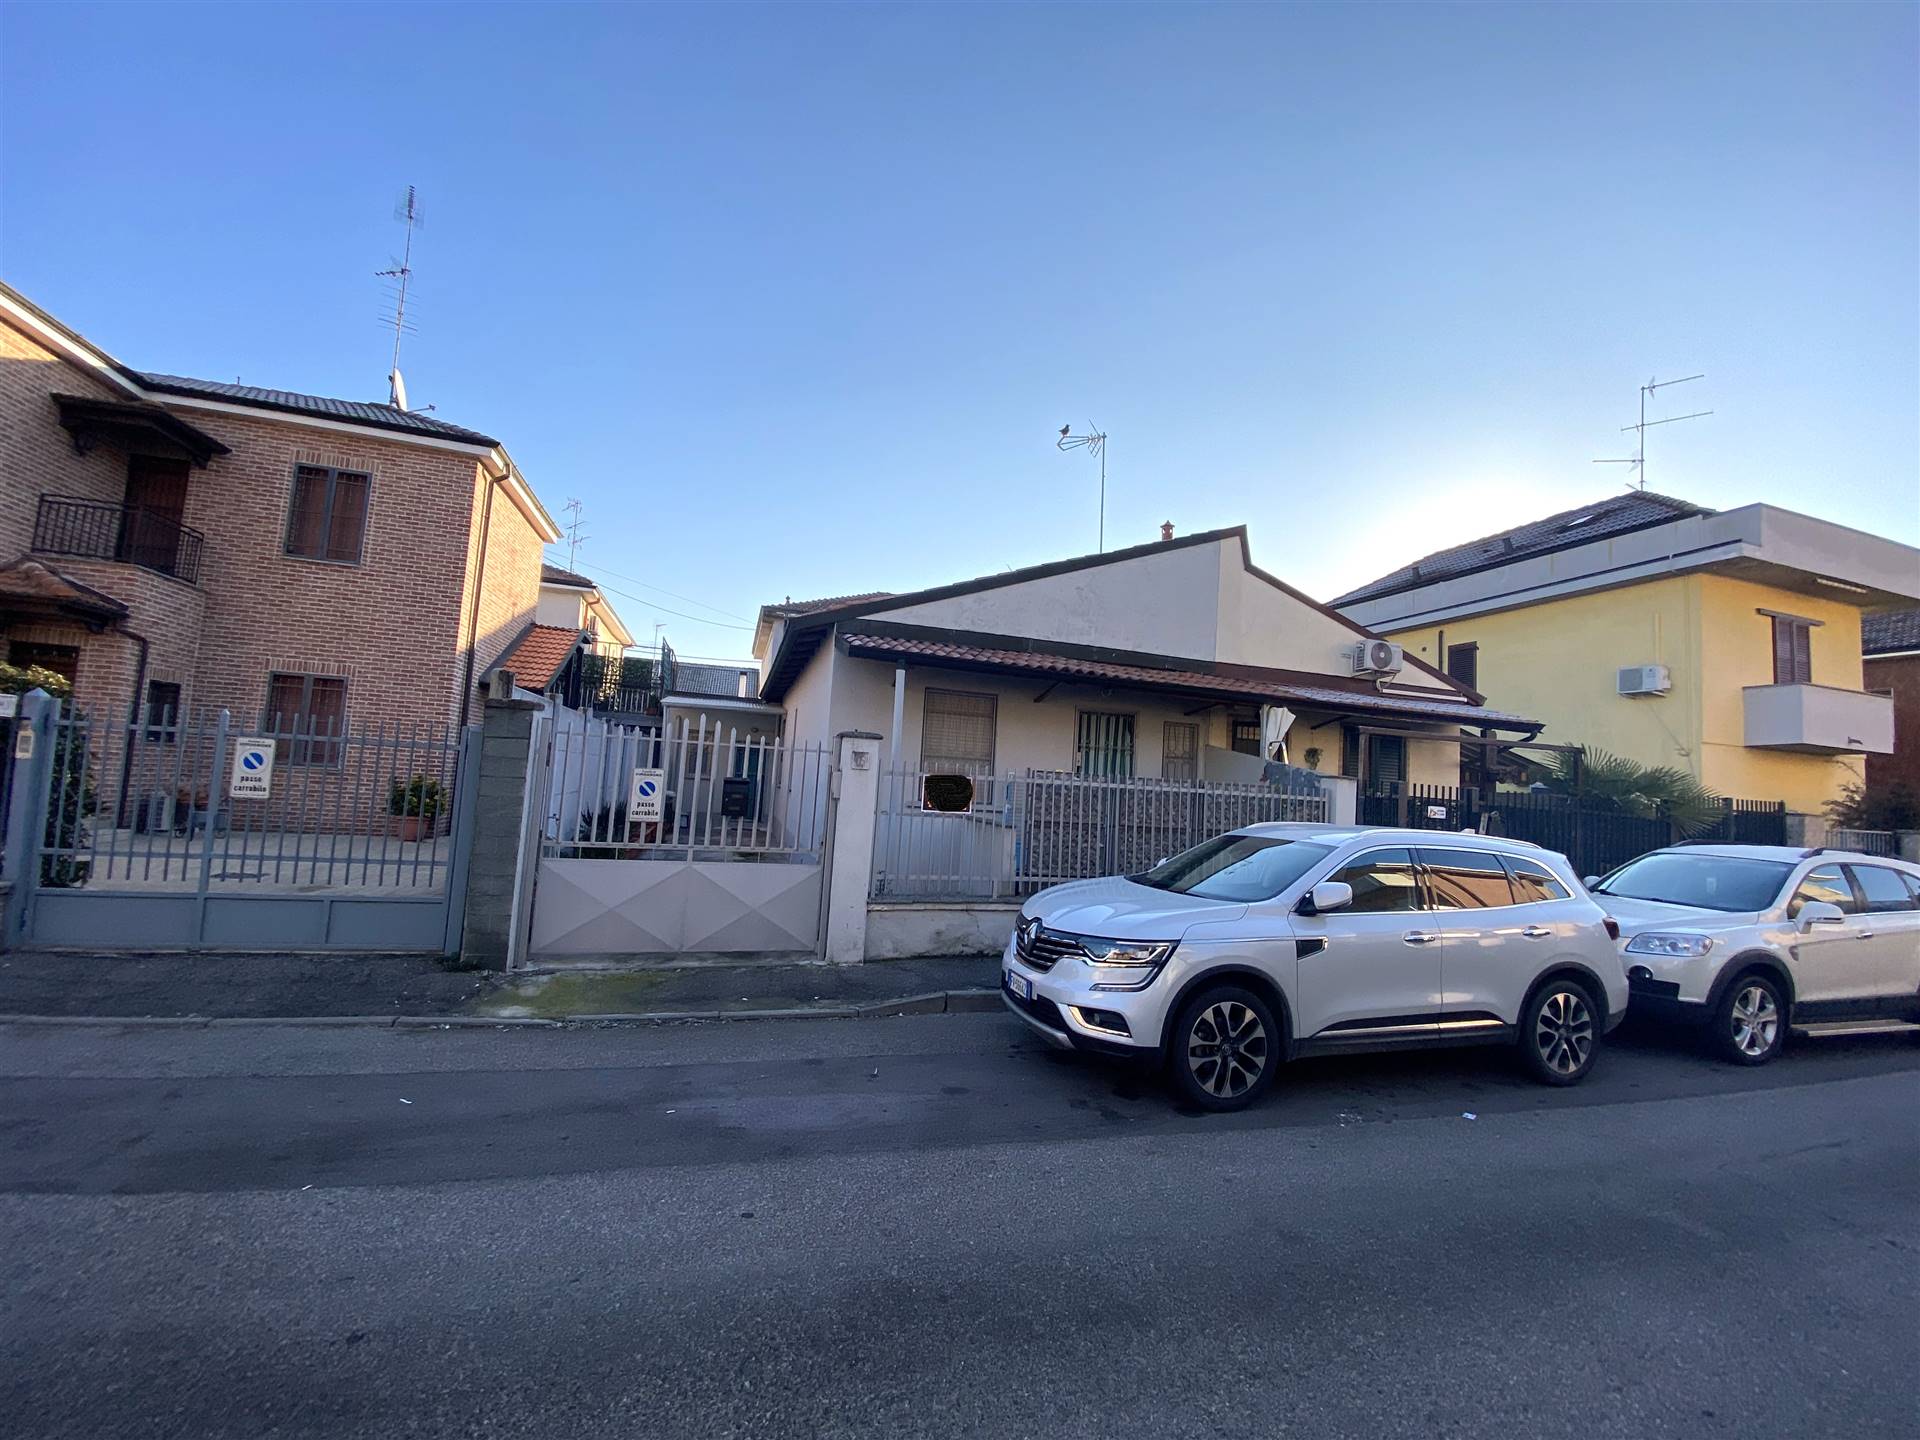 VIMODRONE, Duplex villa for sale, Habitable, Heating Individual heating system, Energetic class: G, Epi: 300 kwh/m2 year, placed at Ground, composed by: 3 Rooms, , 2 Bedrooms, 1 Bathroom, Price: € 